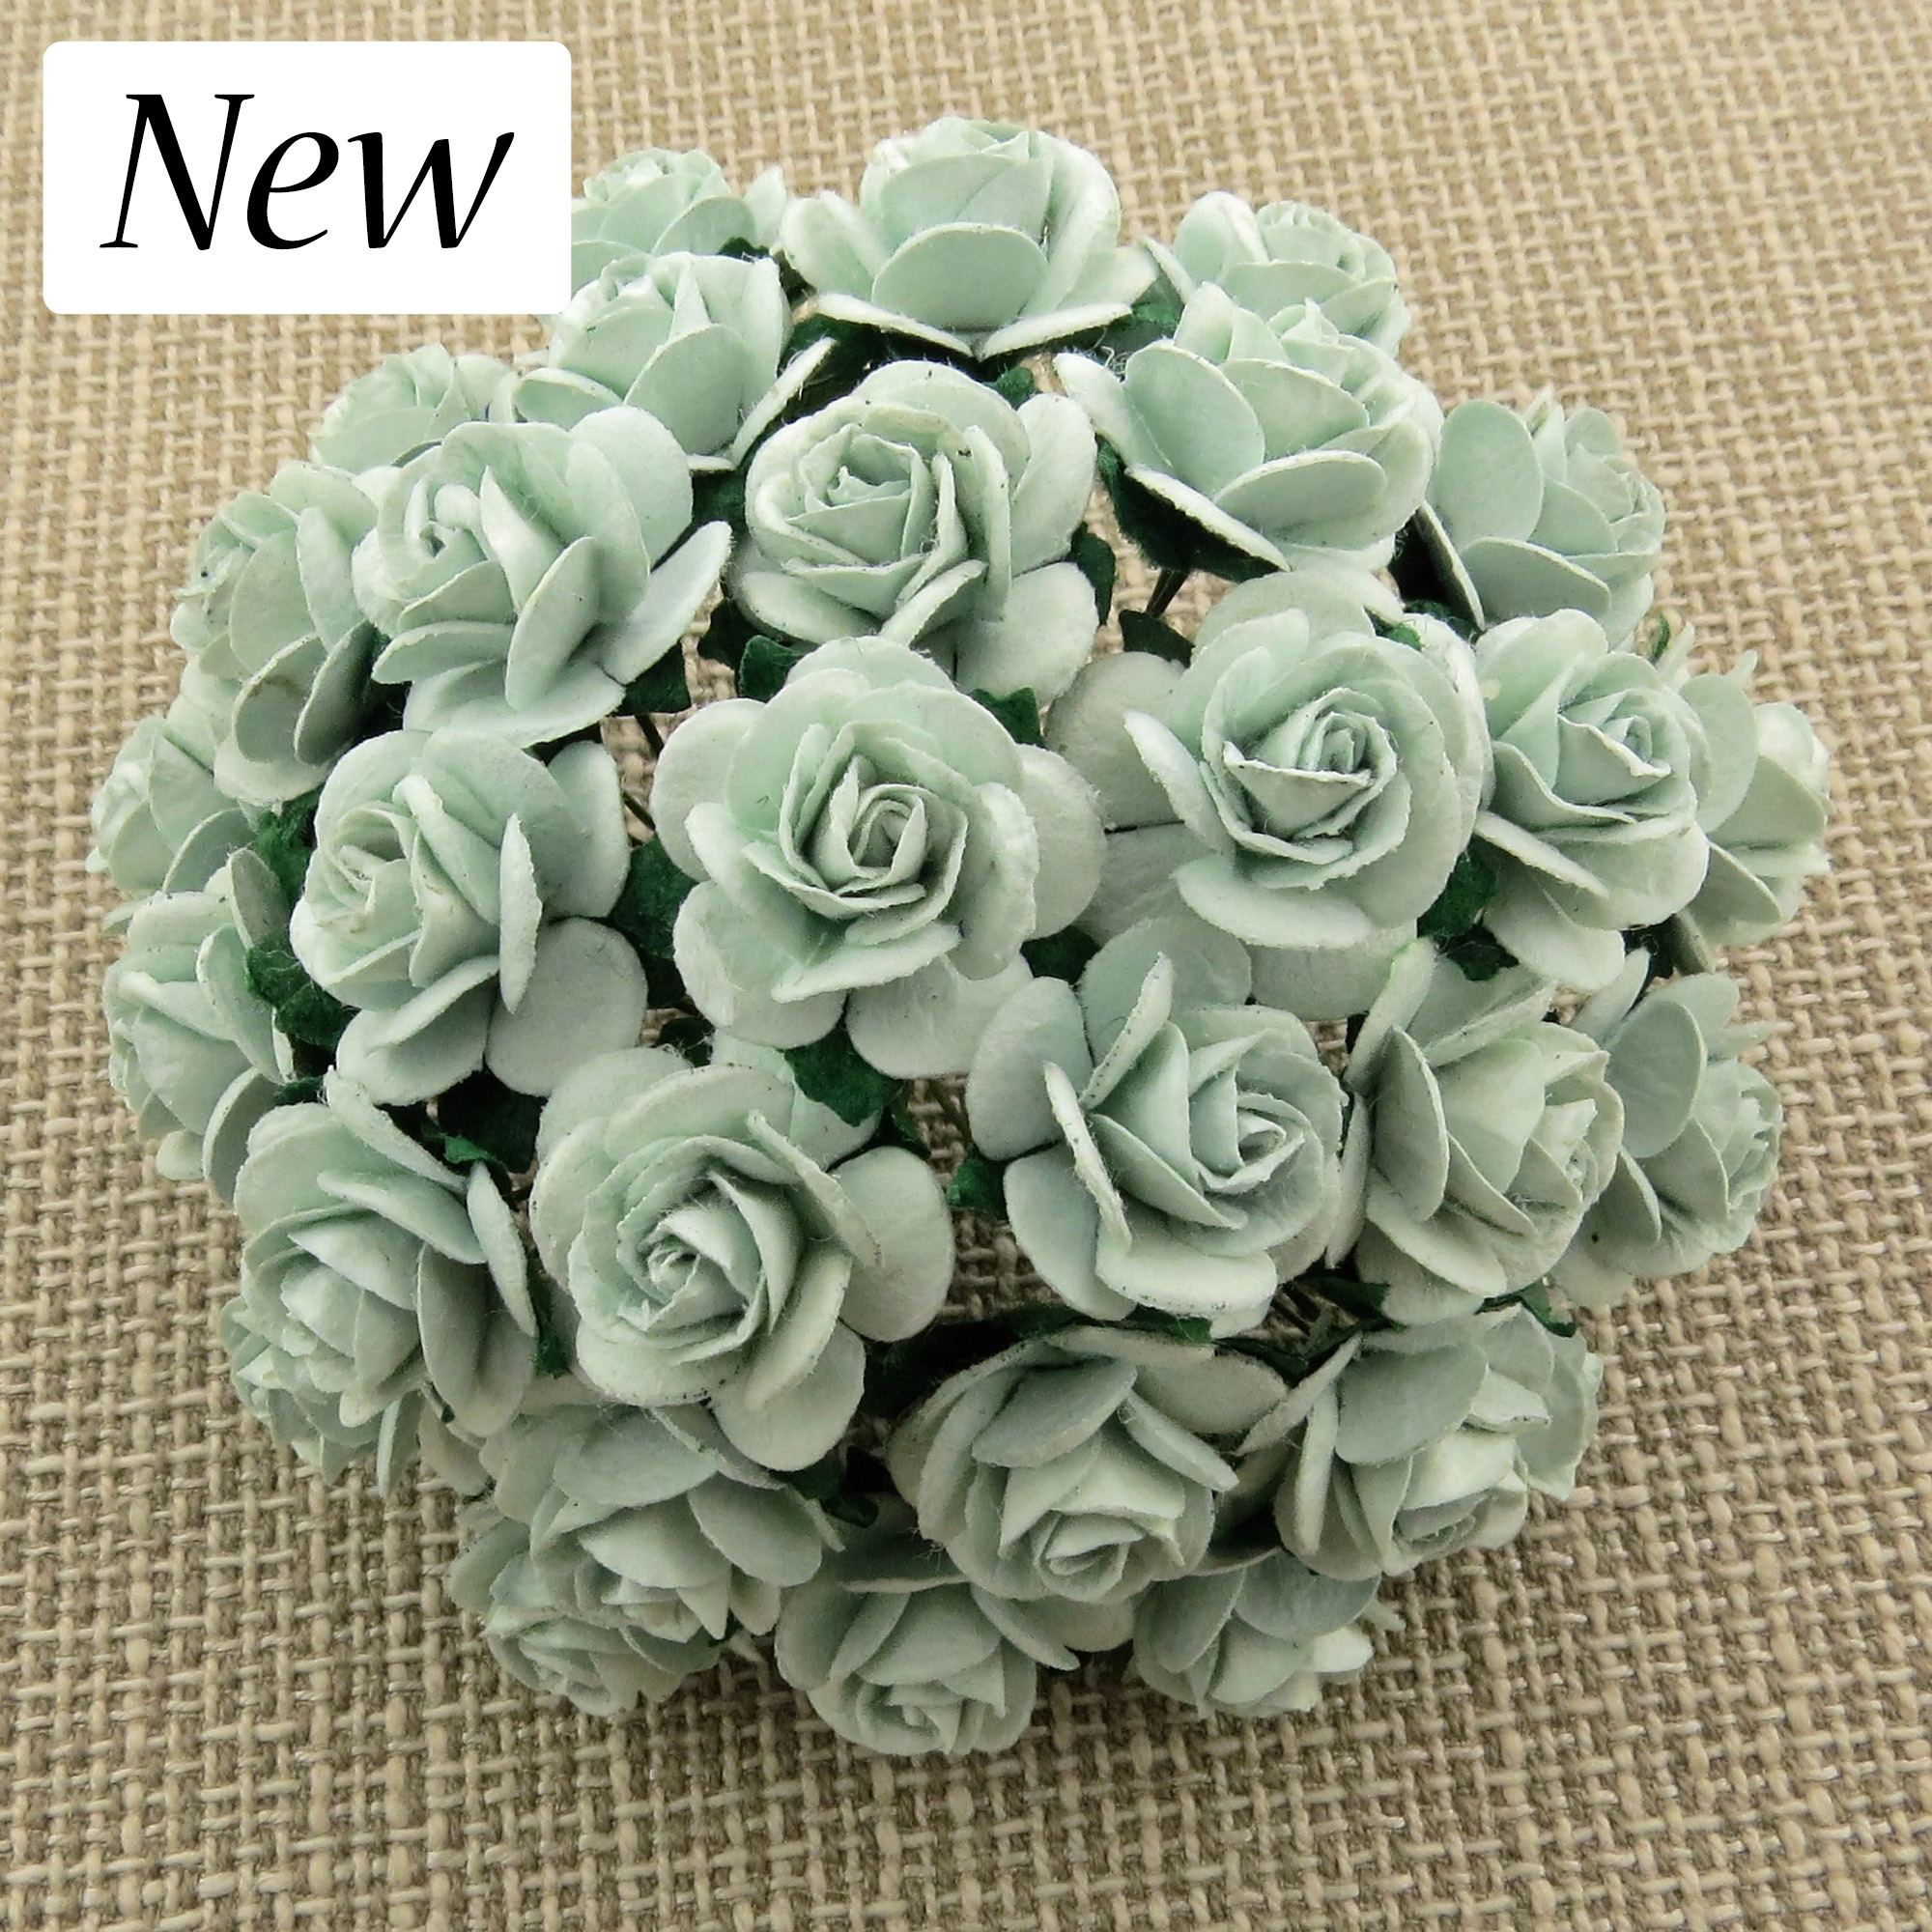 100 PALE BLUE MULBERRY PAPER OPEN ROSES